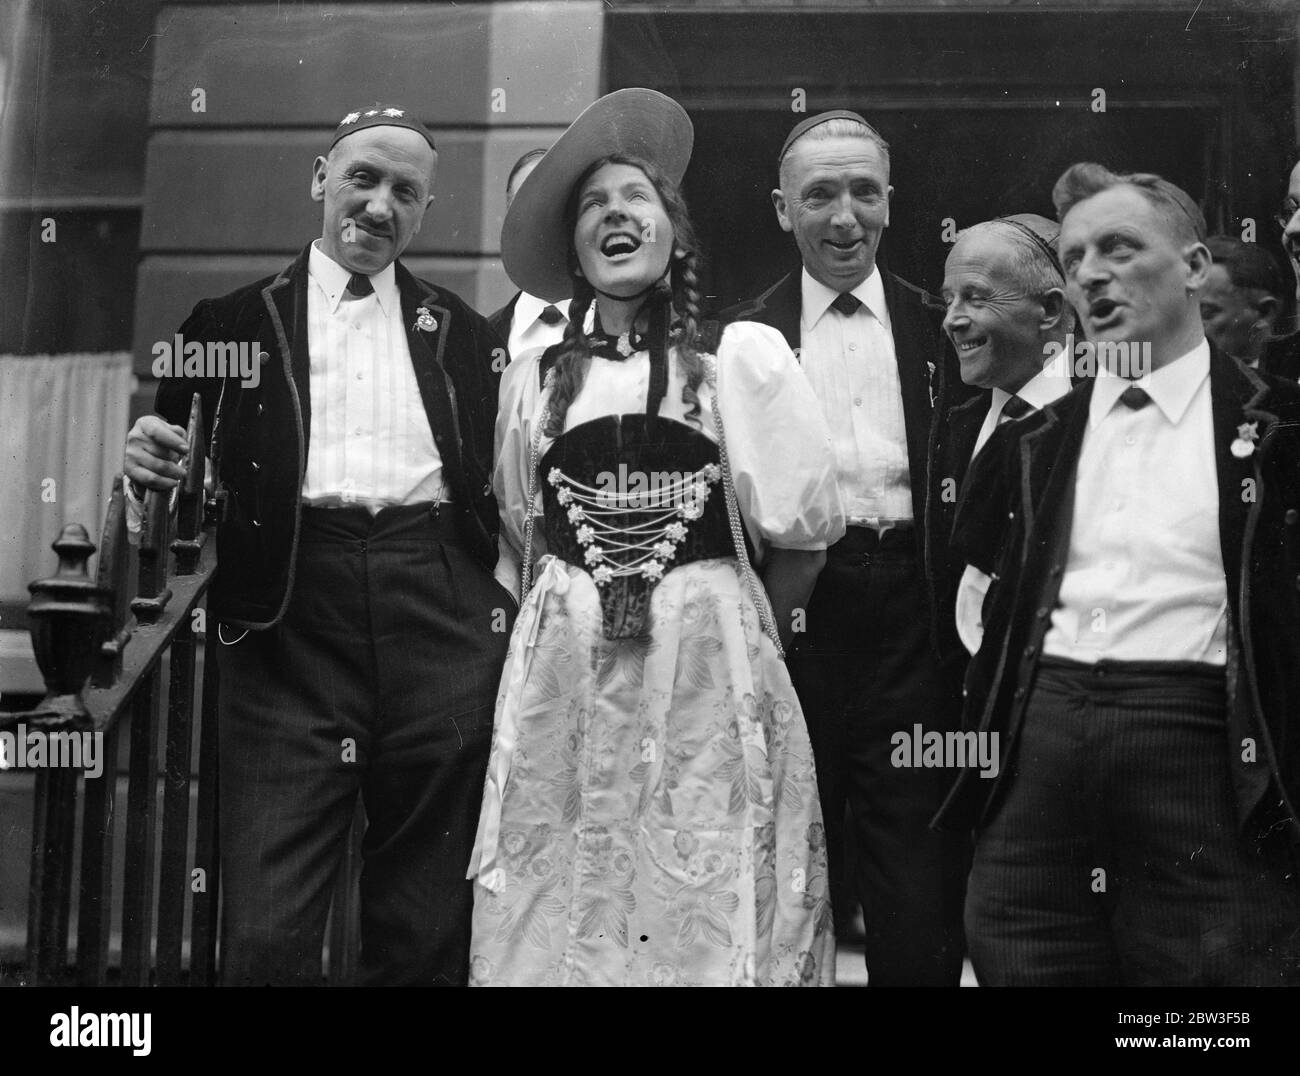 Swiss yodellers arrive in London . To sing at Albert Hall . A party of Swiss Yodellers , dressed in national costume arrived at Victoria STation to sing at the Royal Albert Hall tomorrow ( Saturday ) . They were welcomed by Mr C B Paravicini , the Swiss Minister in London . There were 16 members . Photo shows , Gritli Wenger a singer from Thun on Lake Thun , giving London a taste of her skill . 6 March 1936 Stock Photo